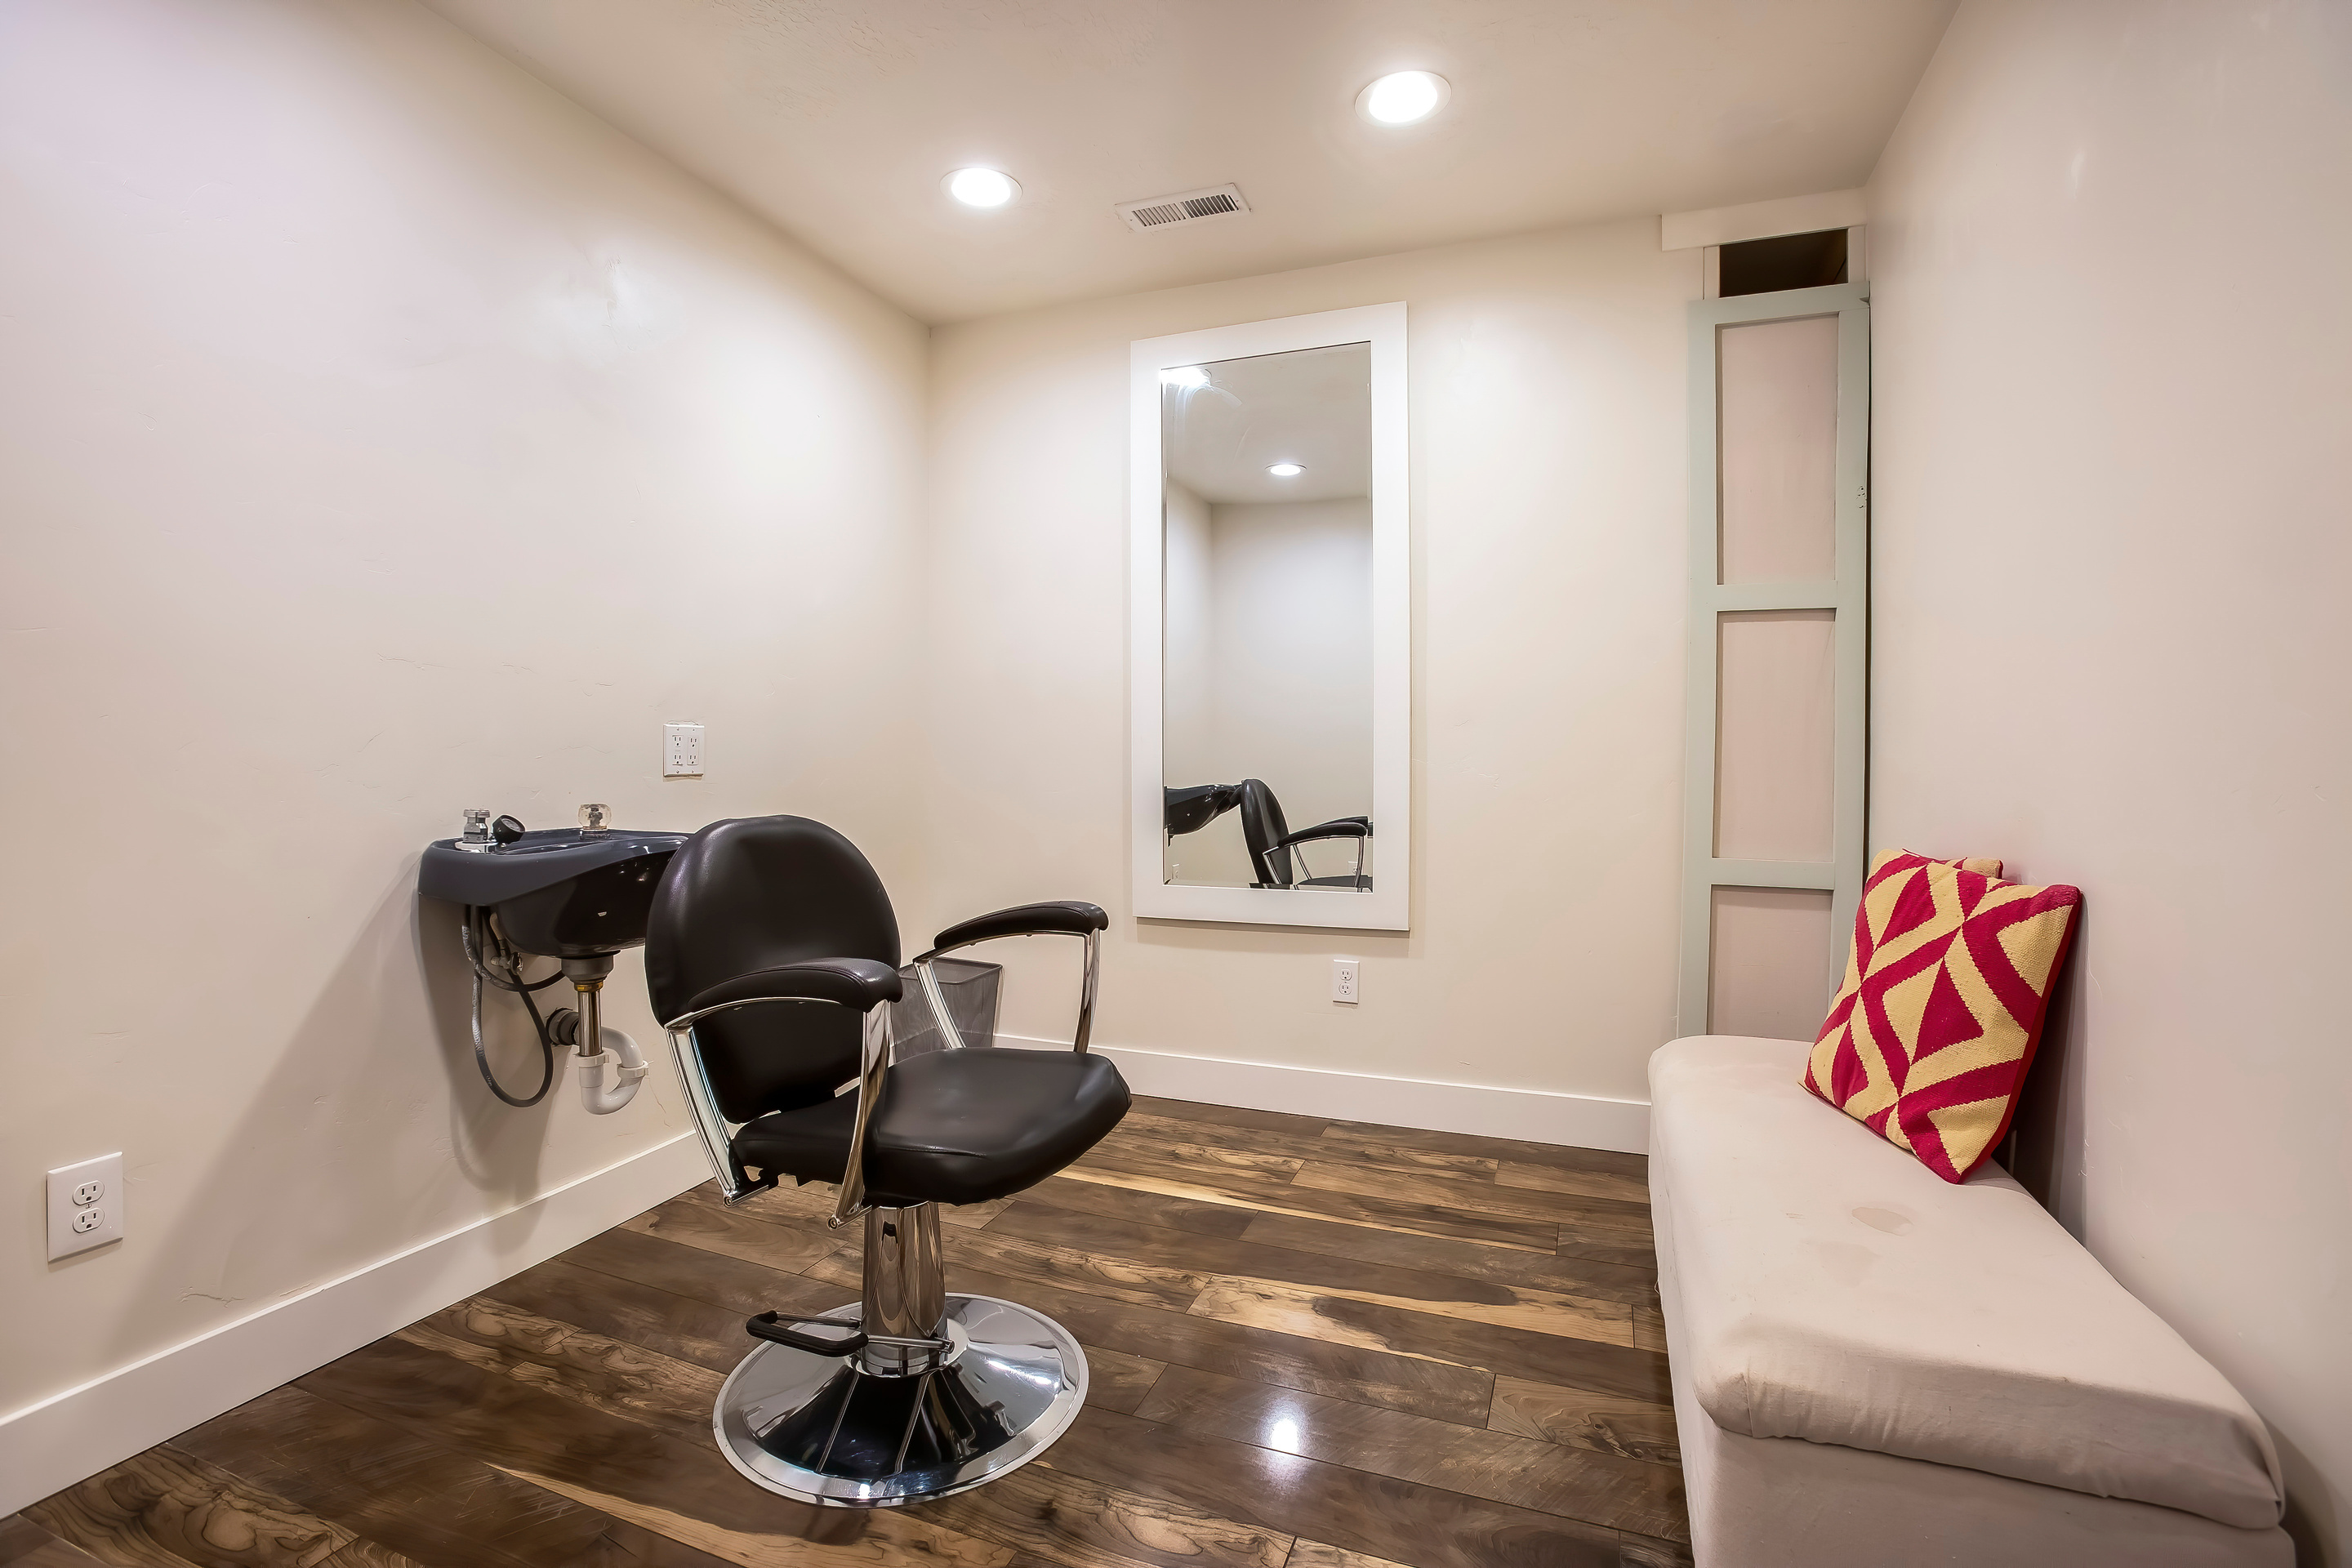 Hairdresser chair and backwash shampoo bowl inside salon with bench and mirror